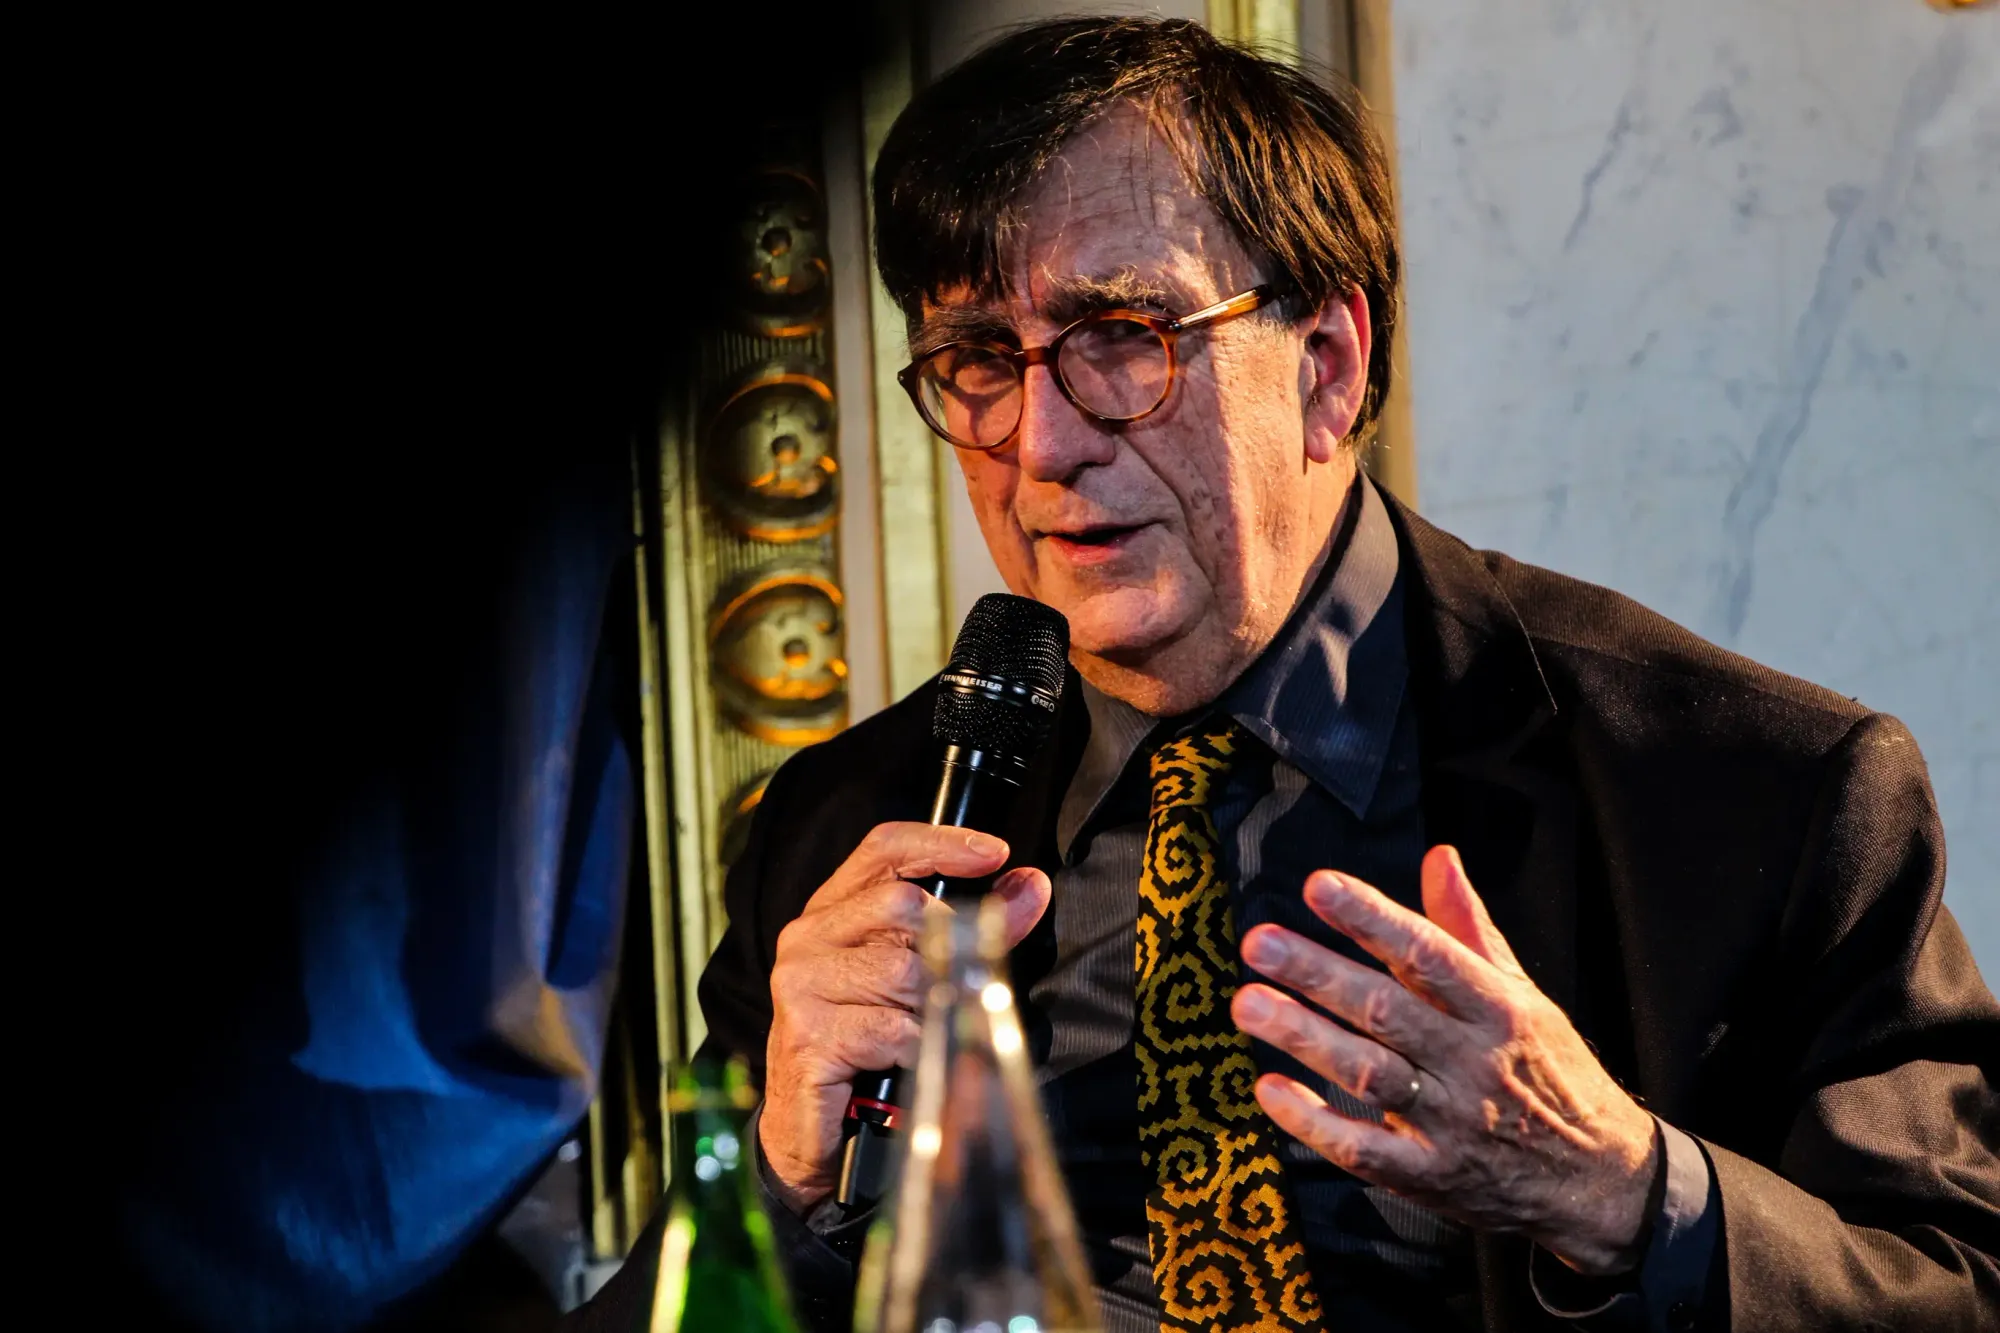 French philosopher Bruno Latour speaking at an event.